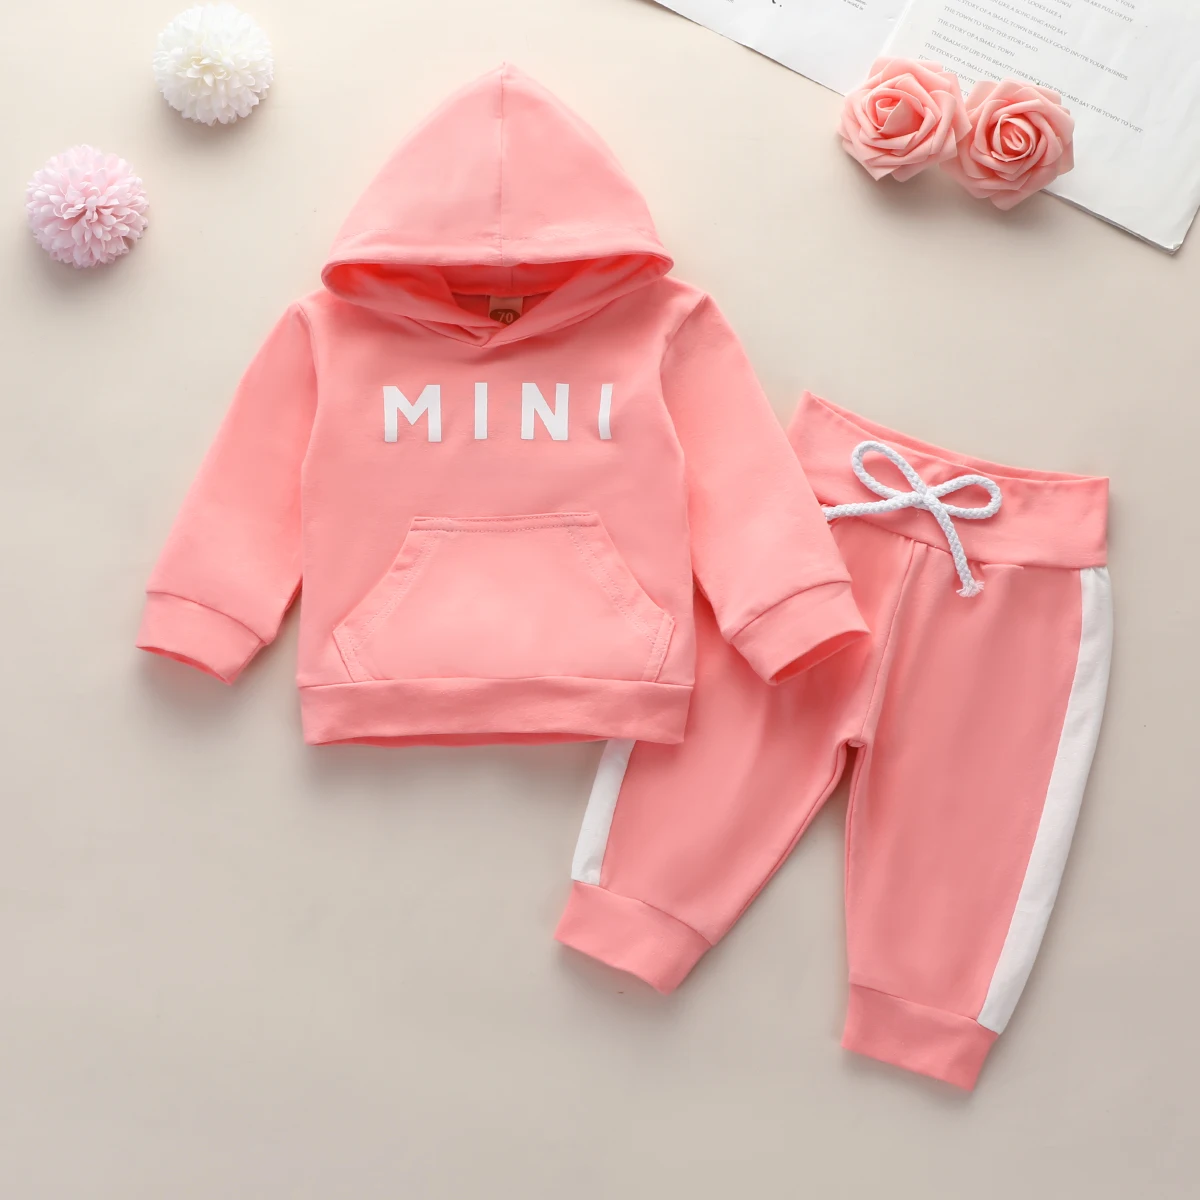 

Baby Girls Lette Long Sleeve Hooded Top + Sports Style Trousers Kit Spring Autumn Toddlers Sportwear Cotton Clothes Set